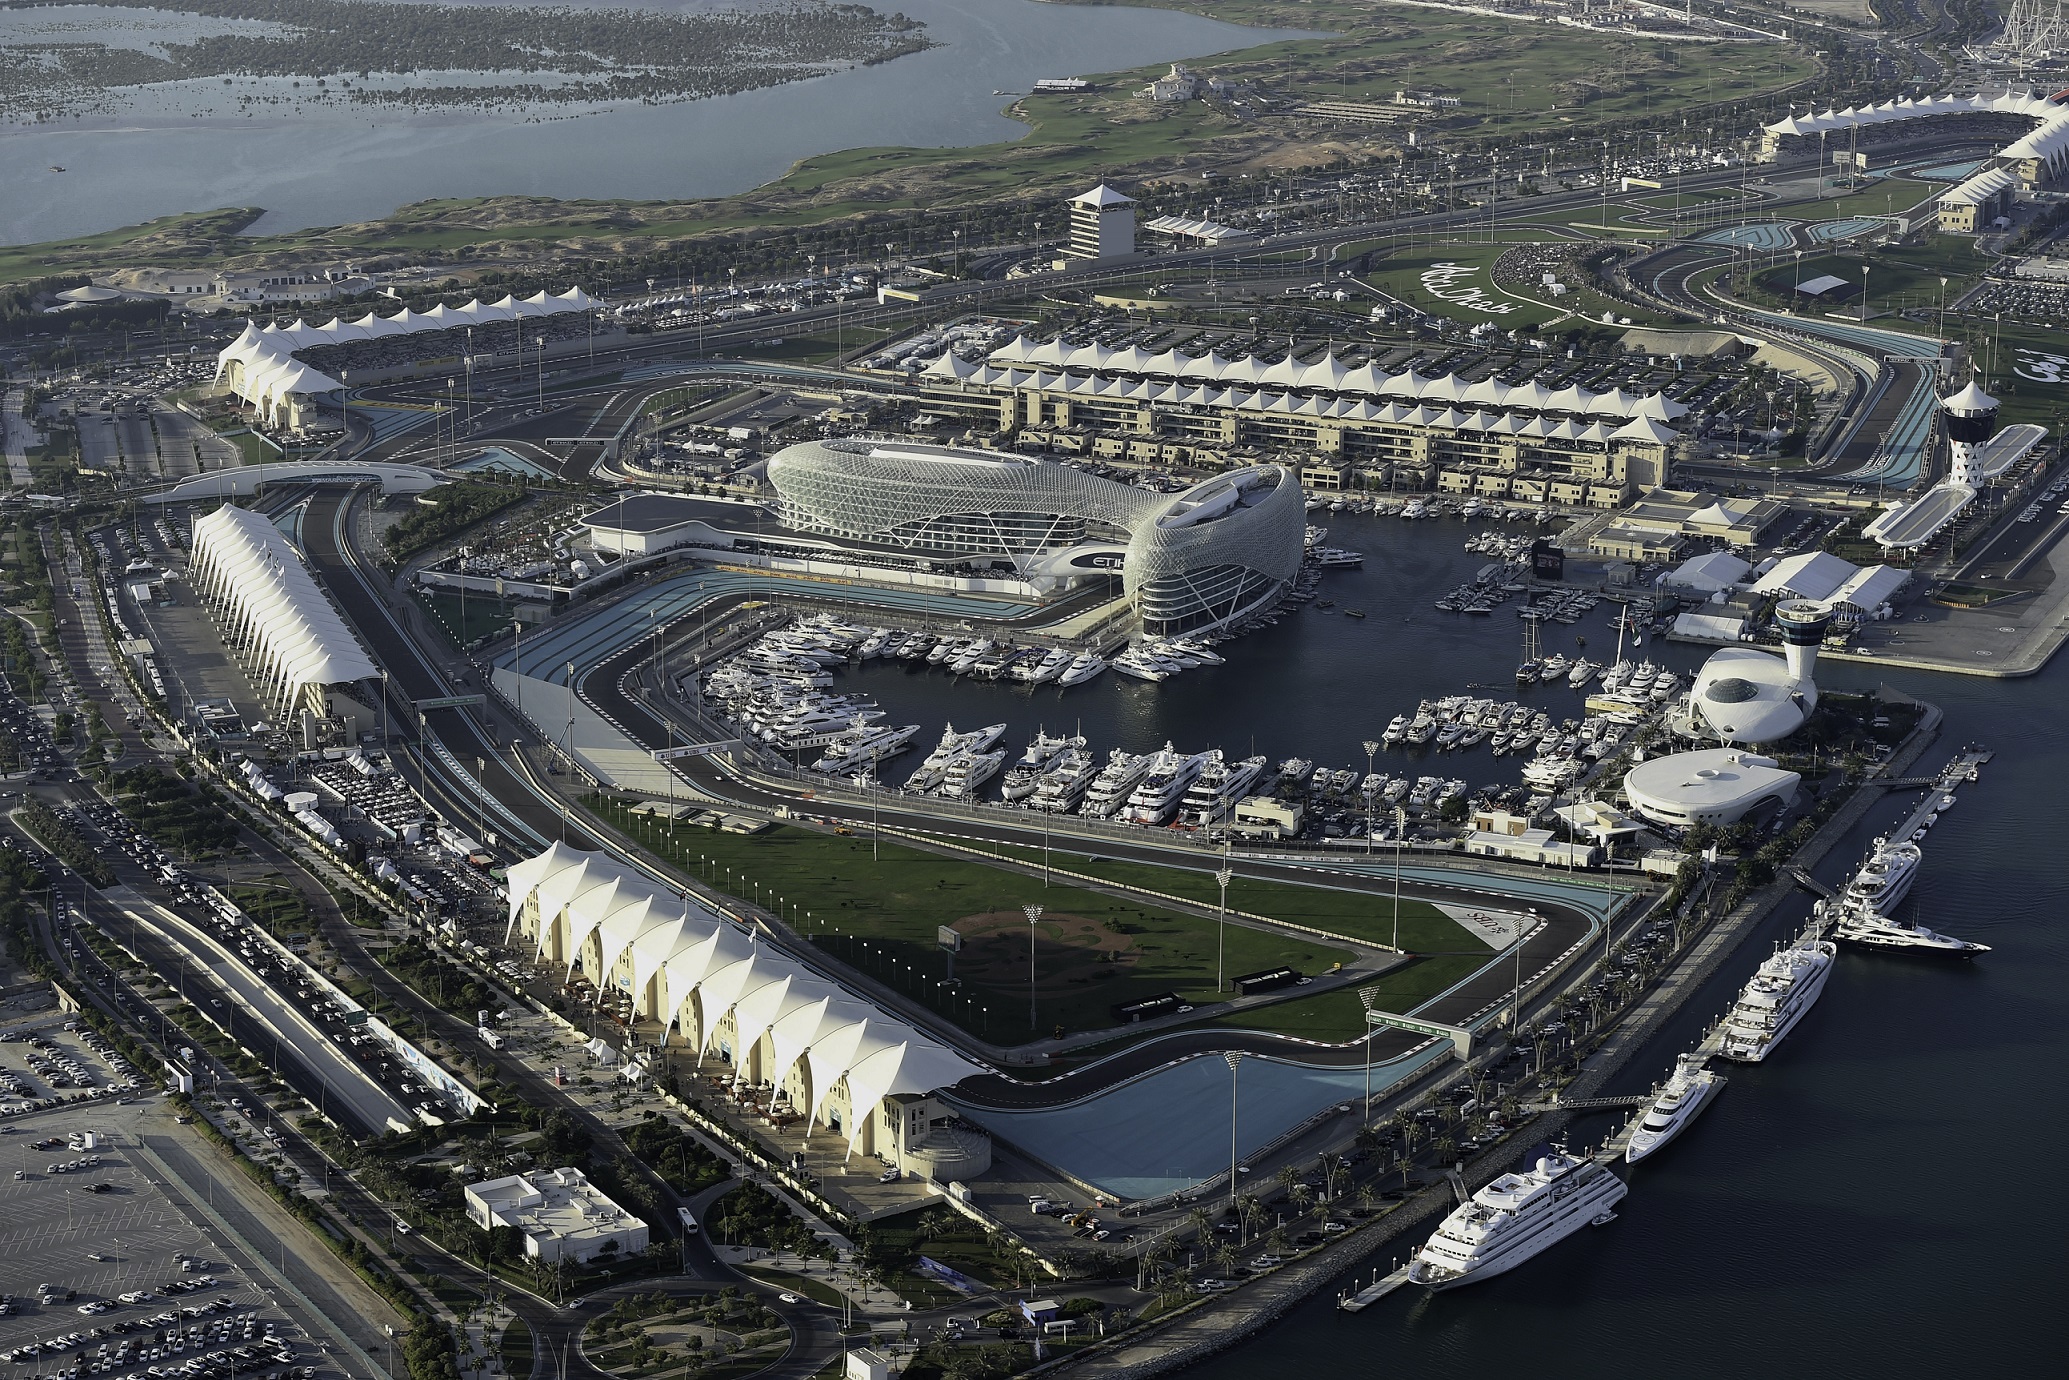 EVENTS ARE BACK: ‘Always-On’ Yas Marina Circuit Reveal Packed 2021/22 Calendar